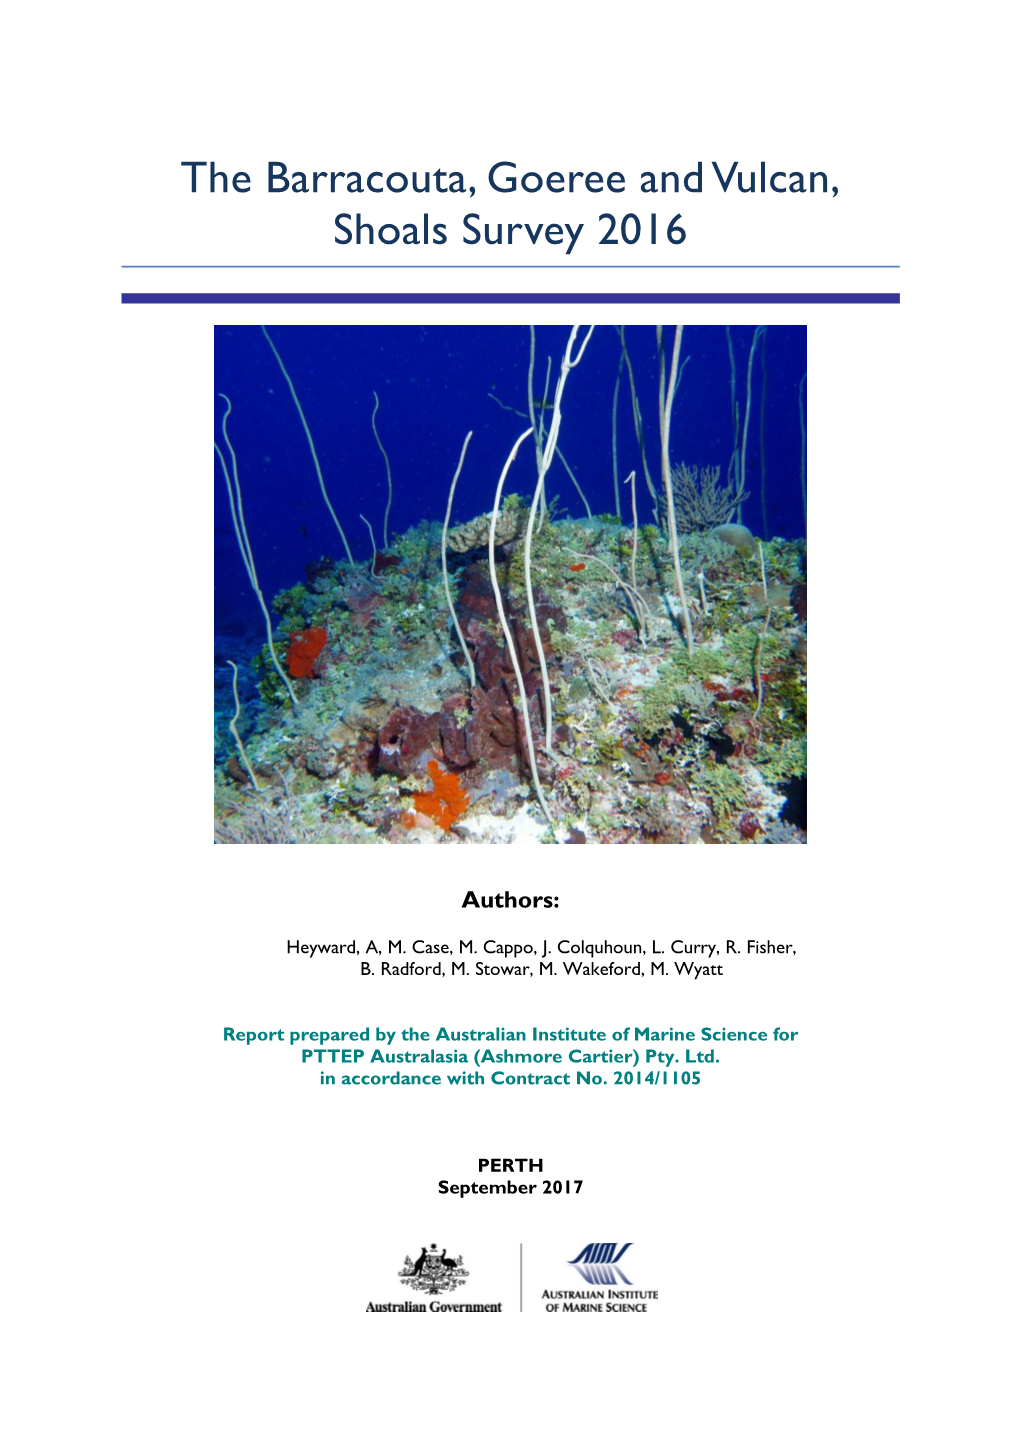 The Barracouta, Goeree and Vulcan, Shoals Survey 2016